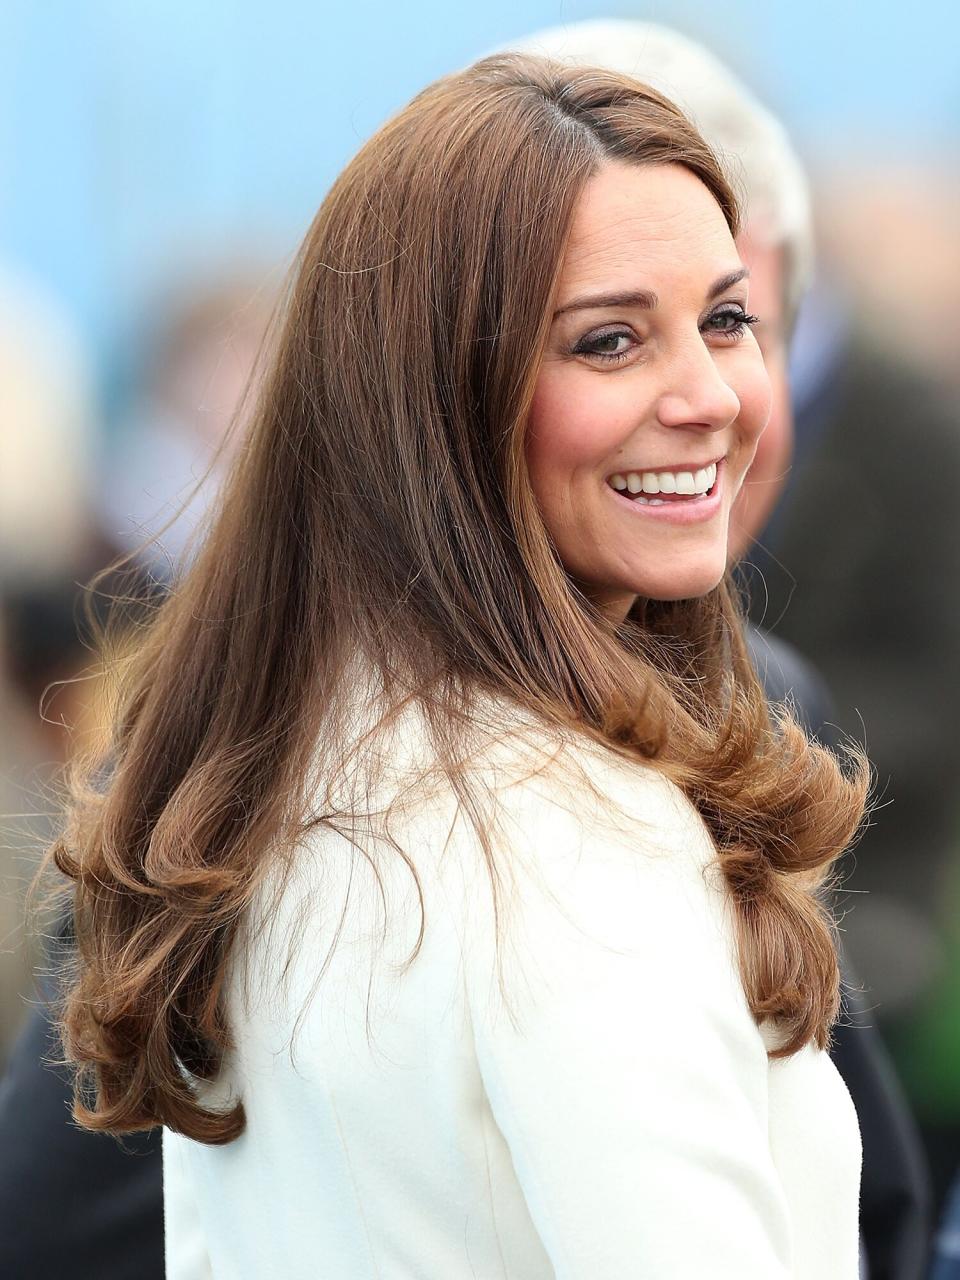 Catherine, Duchess of Cambridge visits an art project at the construction site of Ben Ainslie Racings new headquarters and Visitor Centre on February 12, 2015 in Portsmouth, England